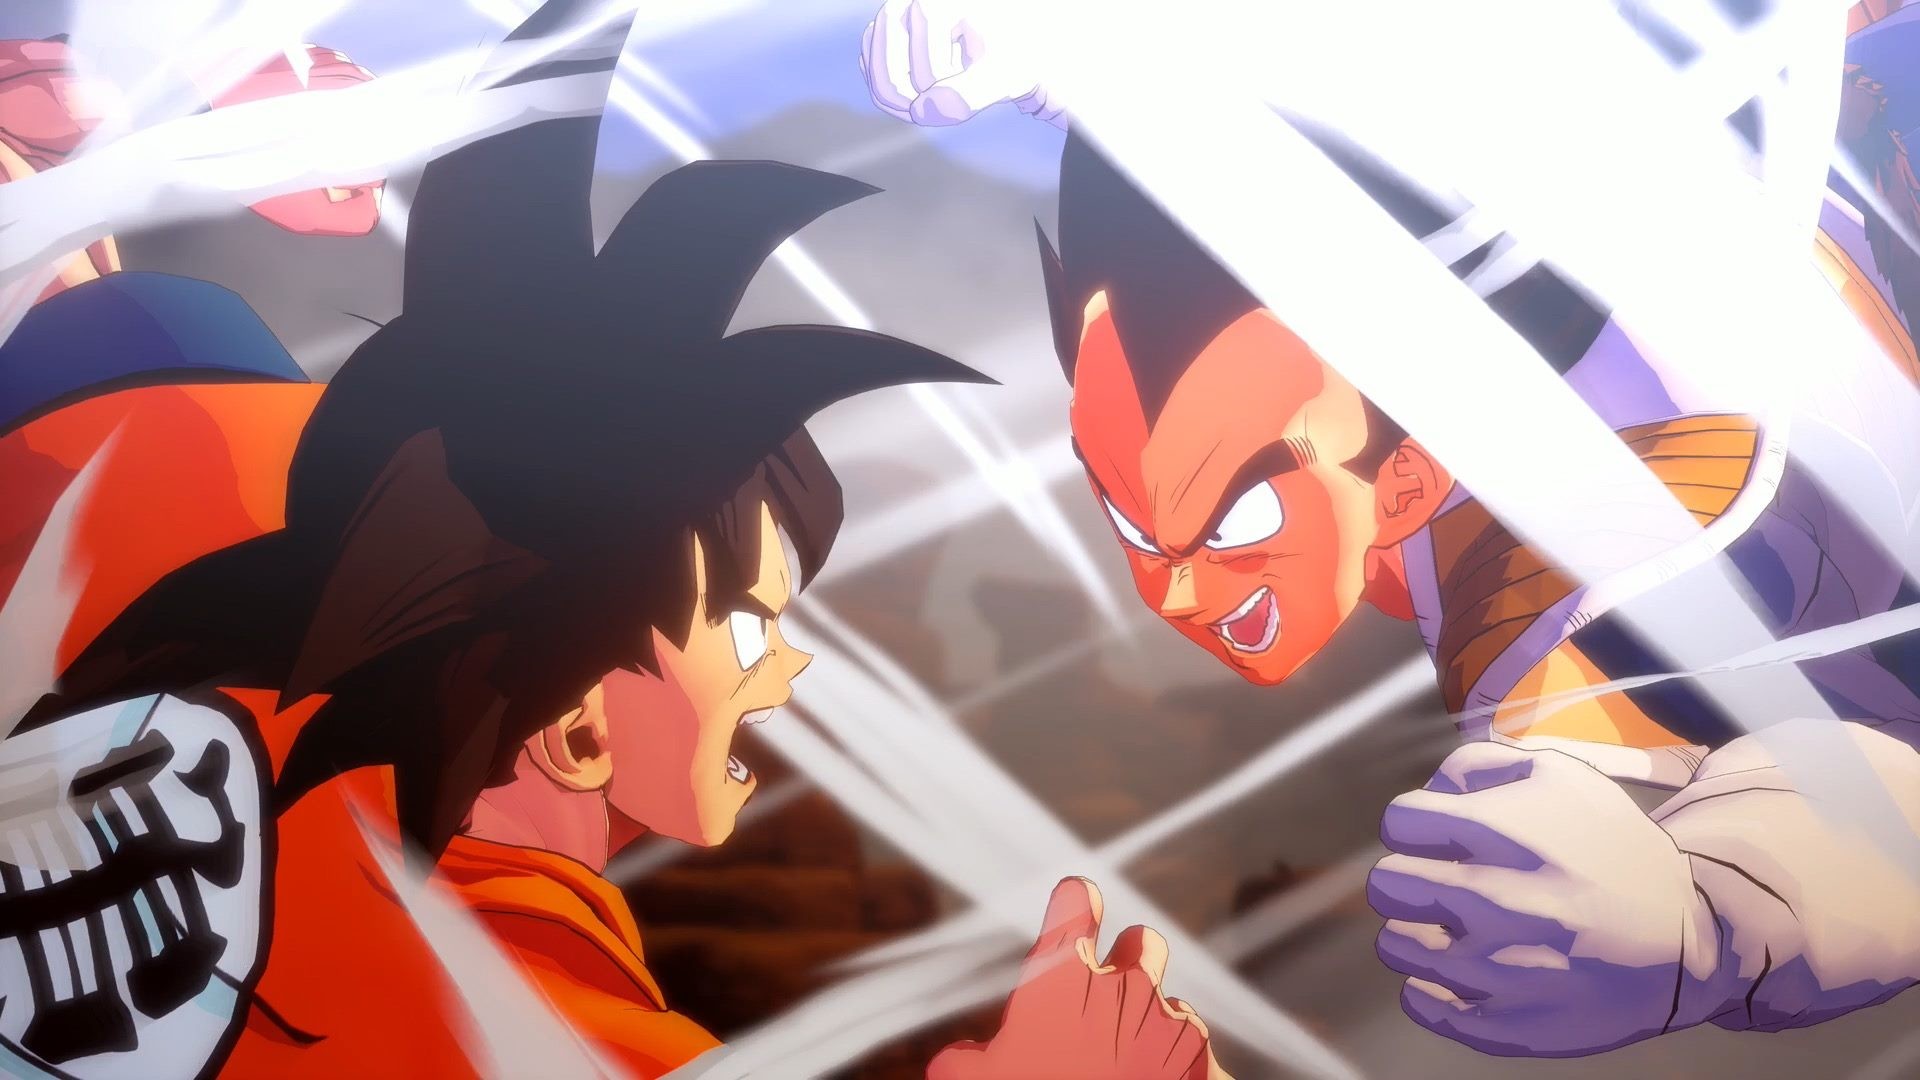 Dragon ball z: kakarot, dragon ball video game,, xone, xbox one, ps4, playstation 4, us, north america, eu, europe, release date, gameplay, features, price, pre-order, bandai namco, cyberconnect2